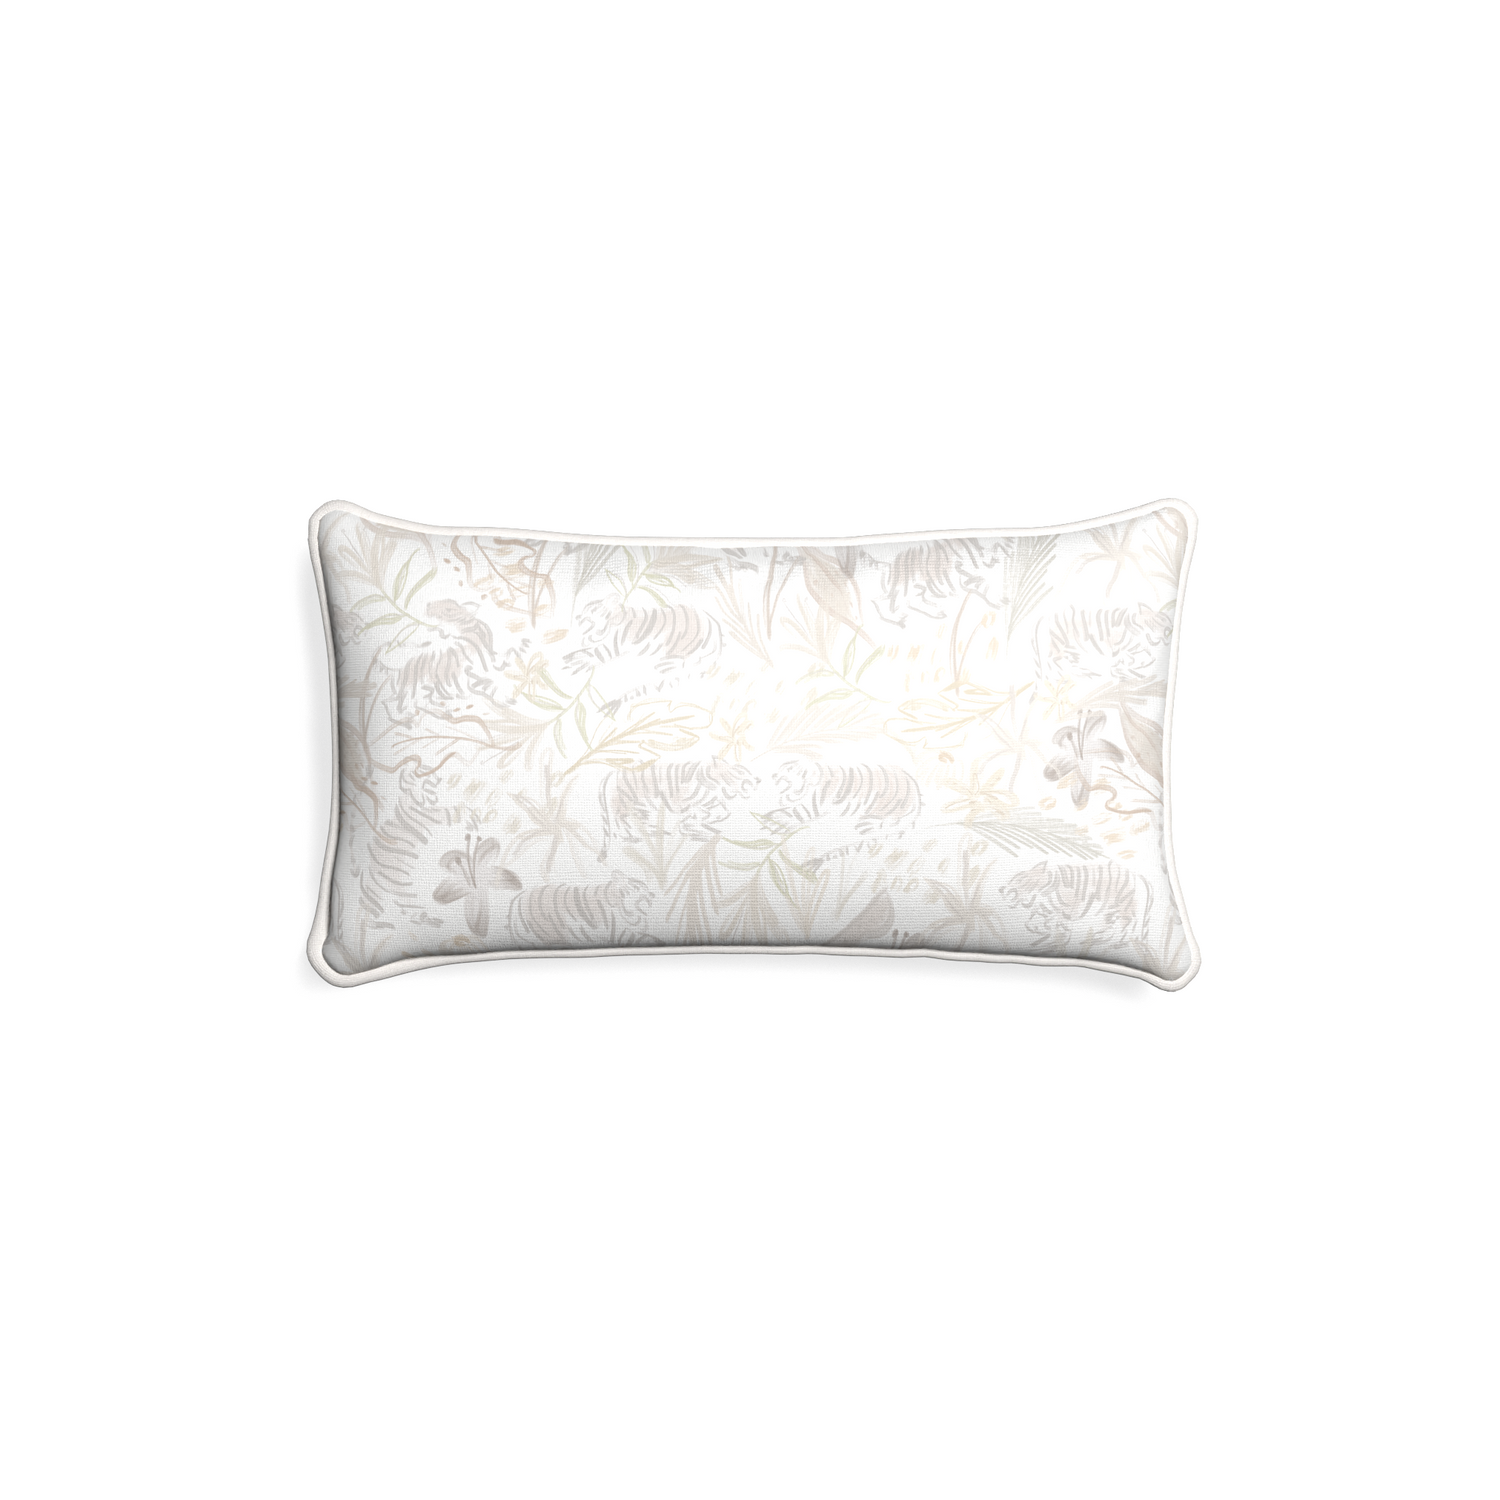 Petite-lumbar frida sand custom beige chinoiserie tigerpillow with snow piping on white background